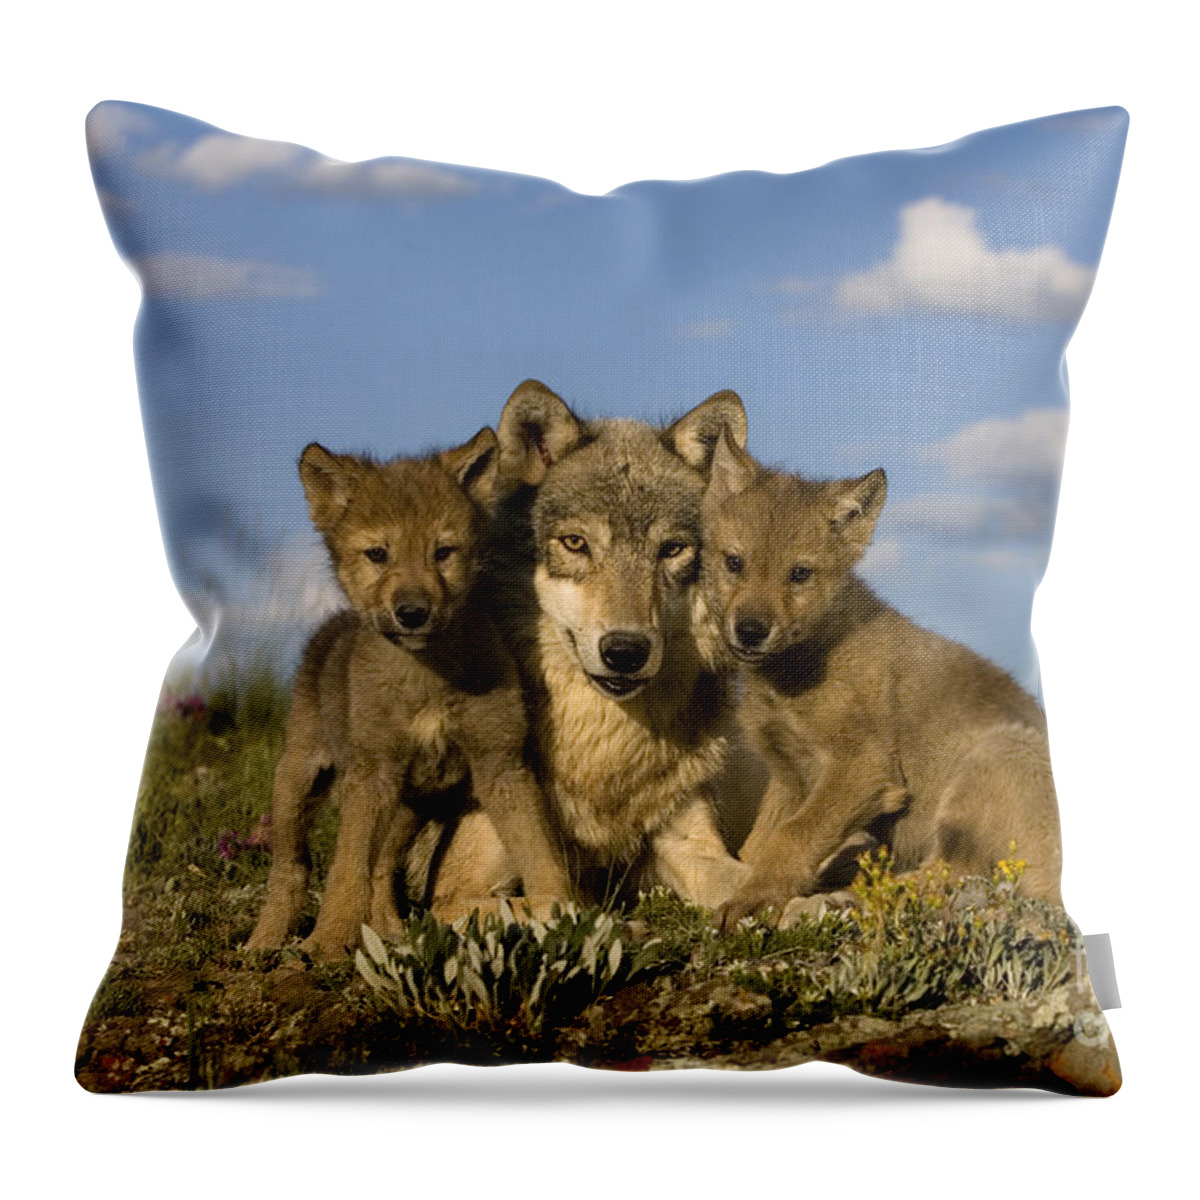 Gray Wolf Throw Pillow featuring the photograph Gray Wolf And Cubs #3 by Jean-Louis Klein & Marie-Luce Hubert